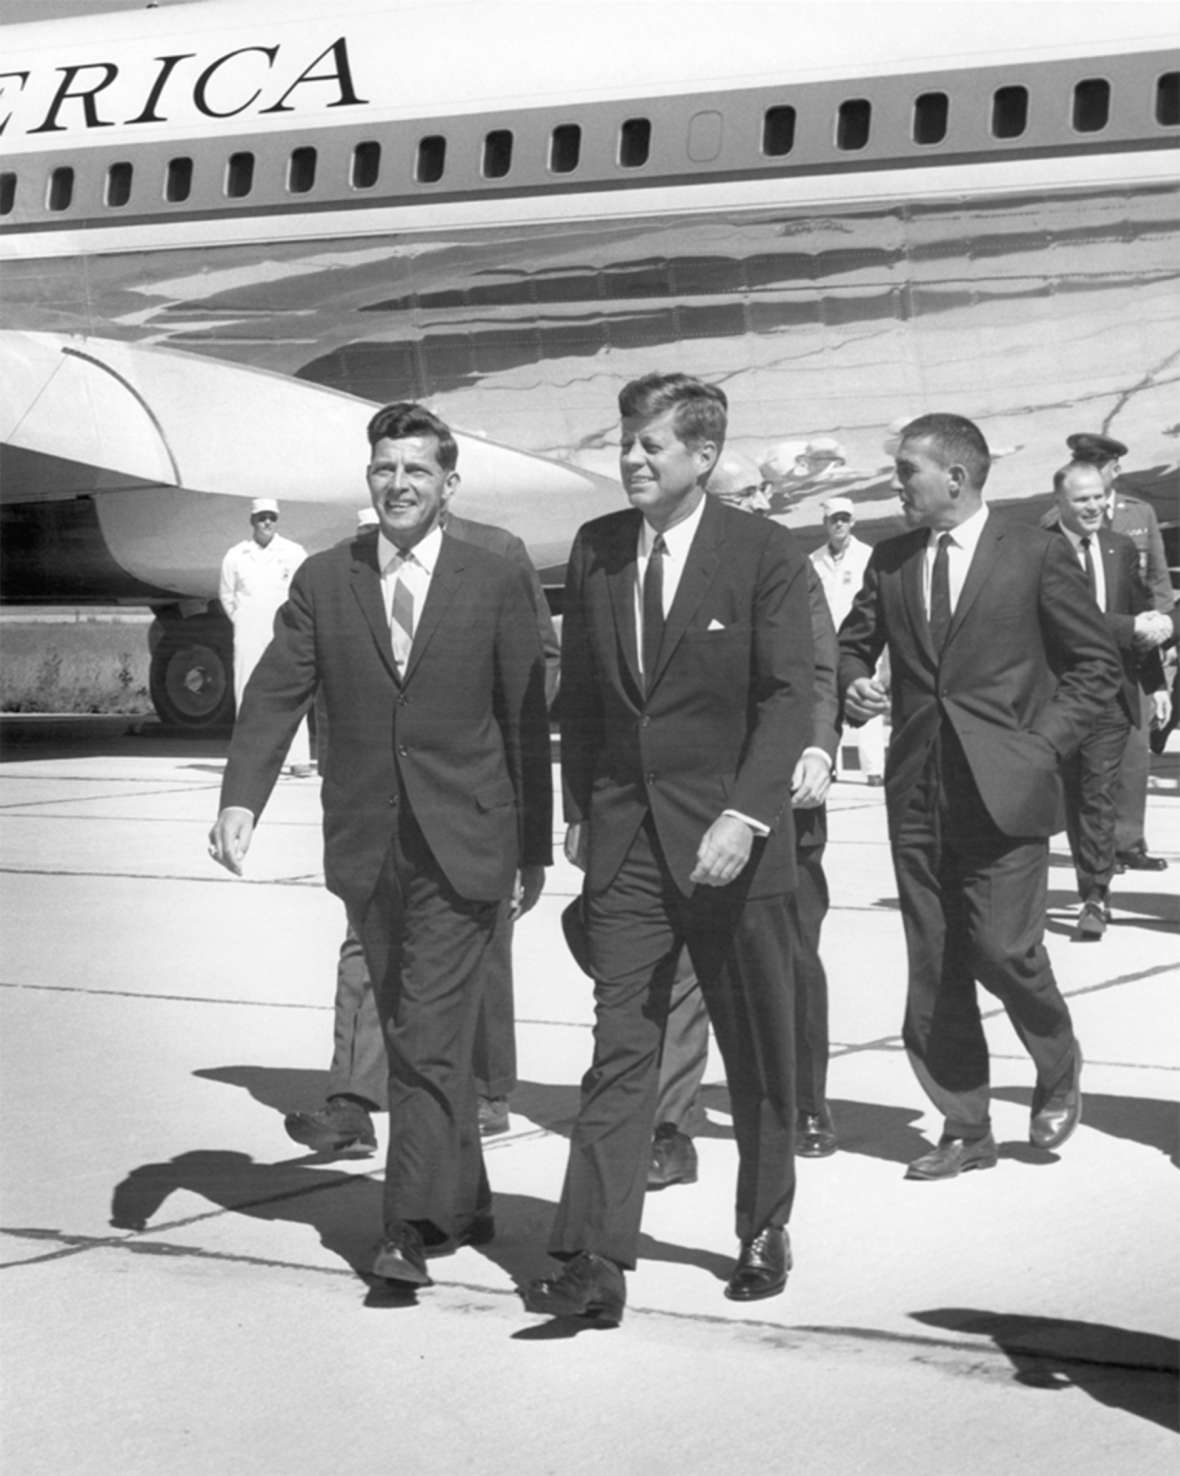 Gale McGee, left, was still in his first Senate term when President Kennedy, center, stopped at the Cheyenne airport in October 1963. Behind the president is Interior Secretary Stewart Udall; behind him, shaking hands, is Cheyenne Mayor Bill Nation. Wyoming State Archives.